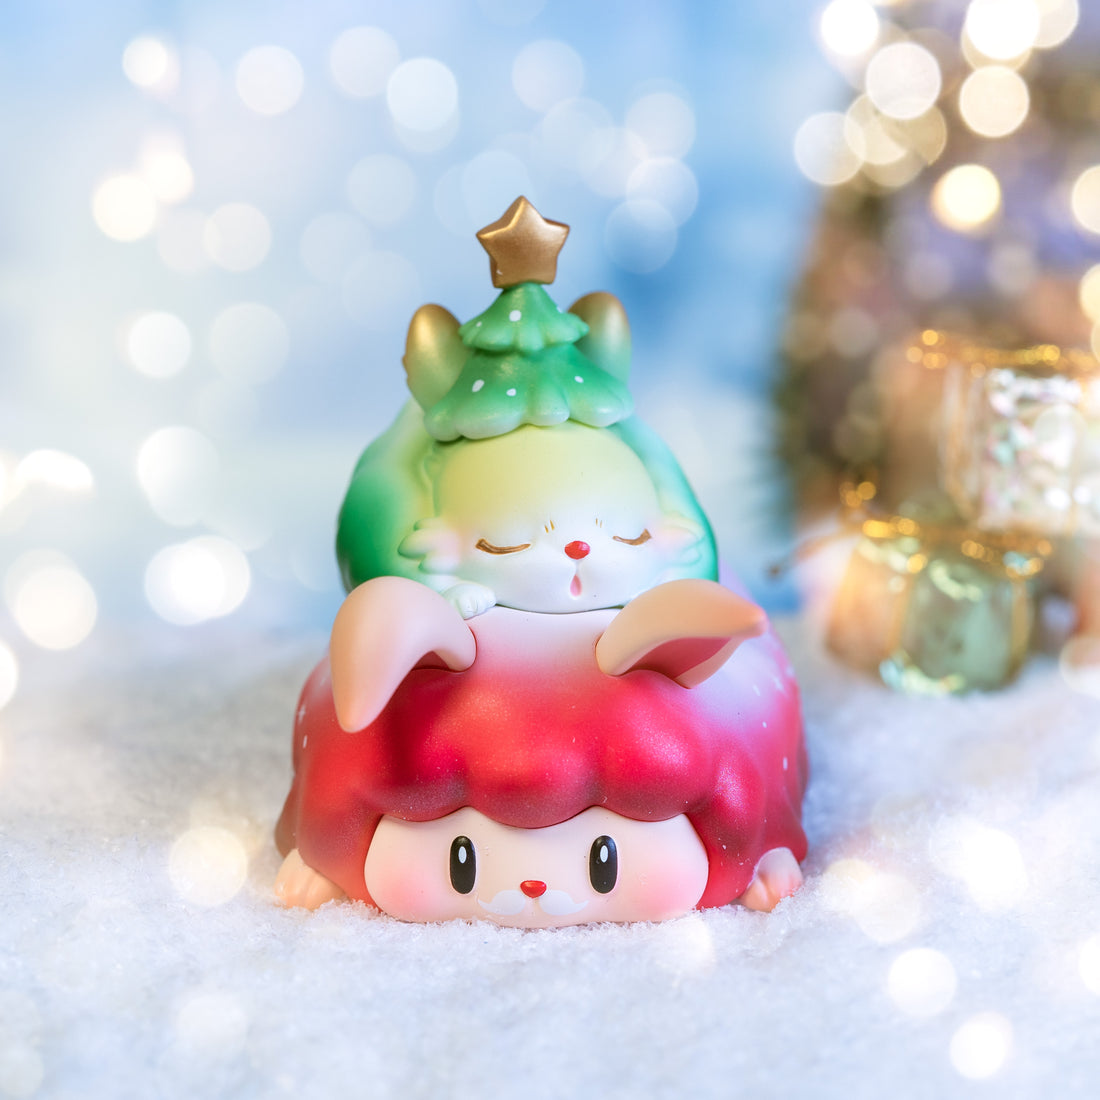 [Bunny May x Raby] The Relax Moment: Christmas Version